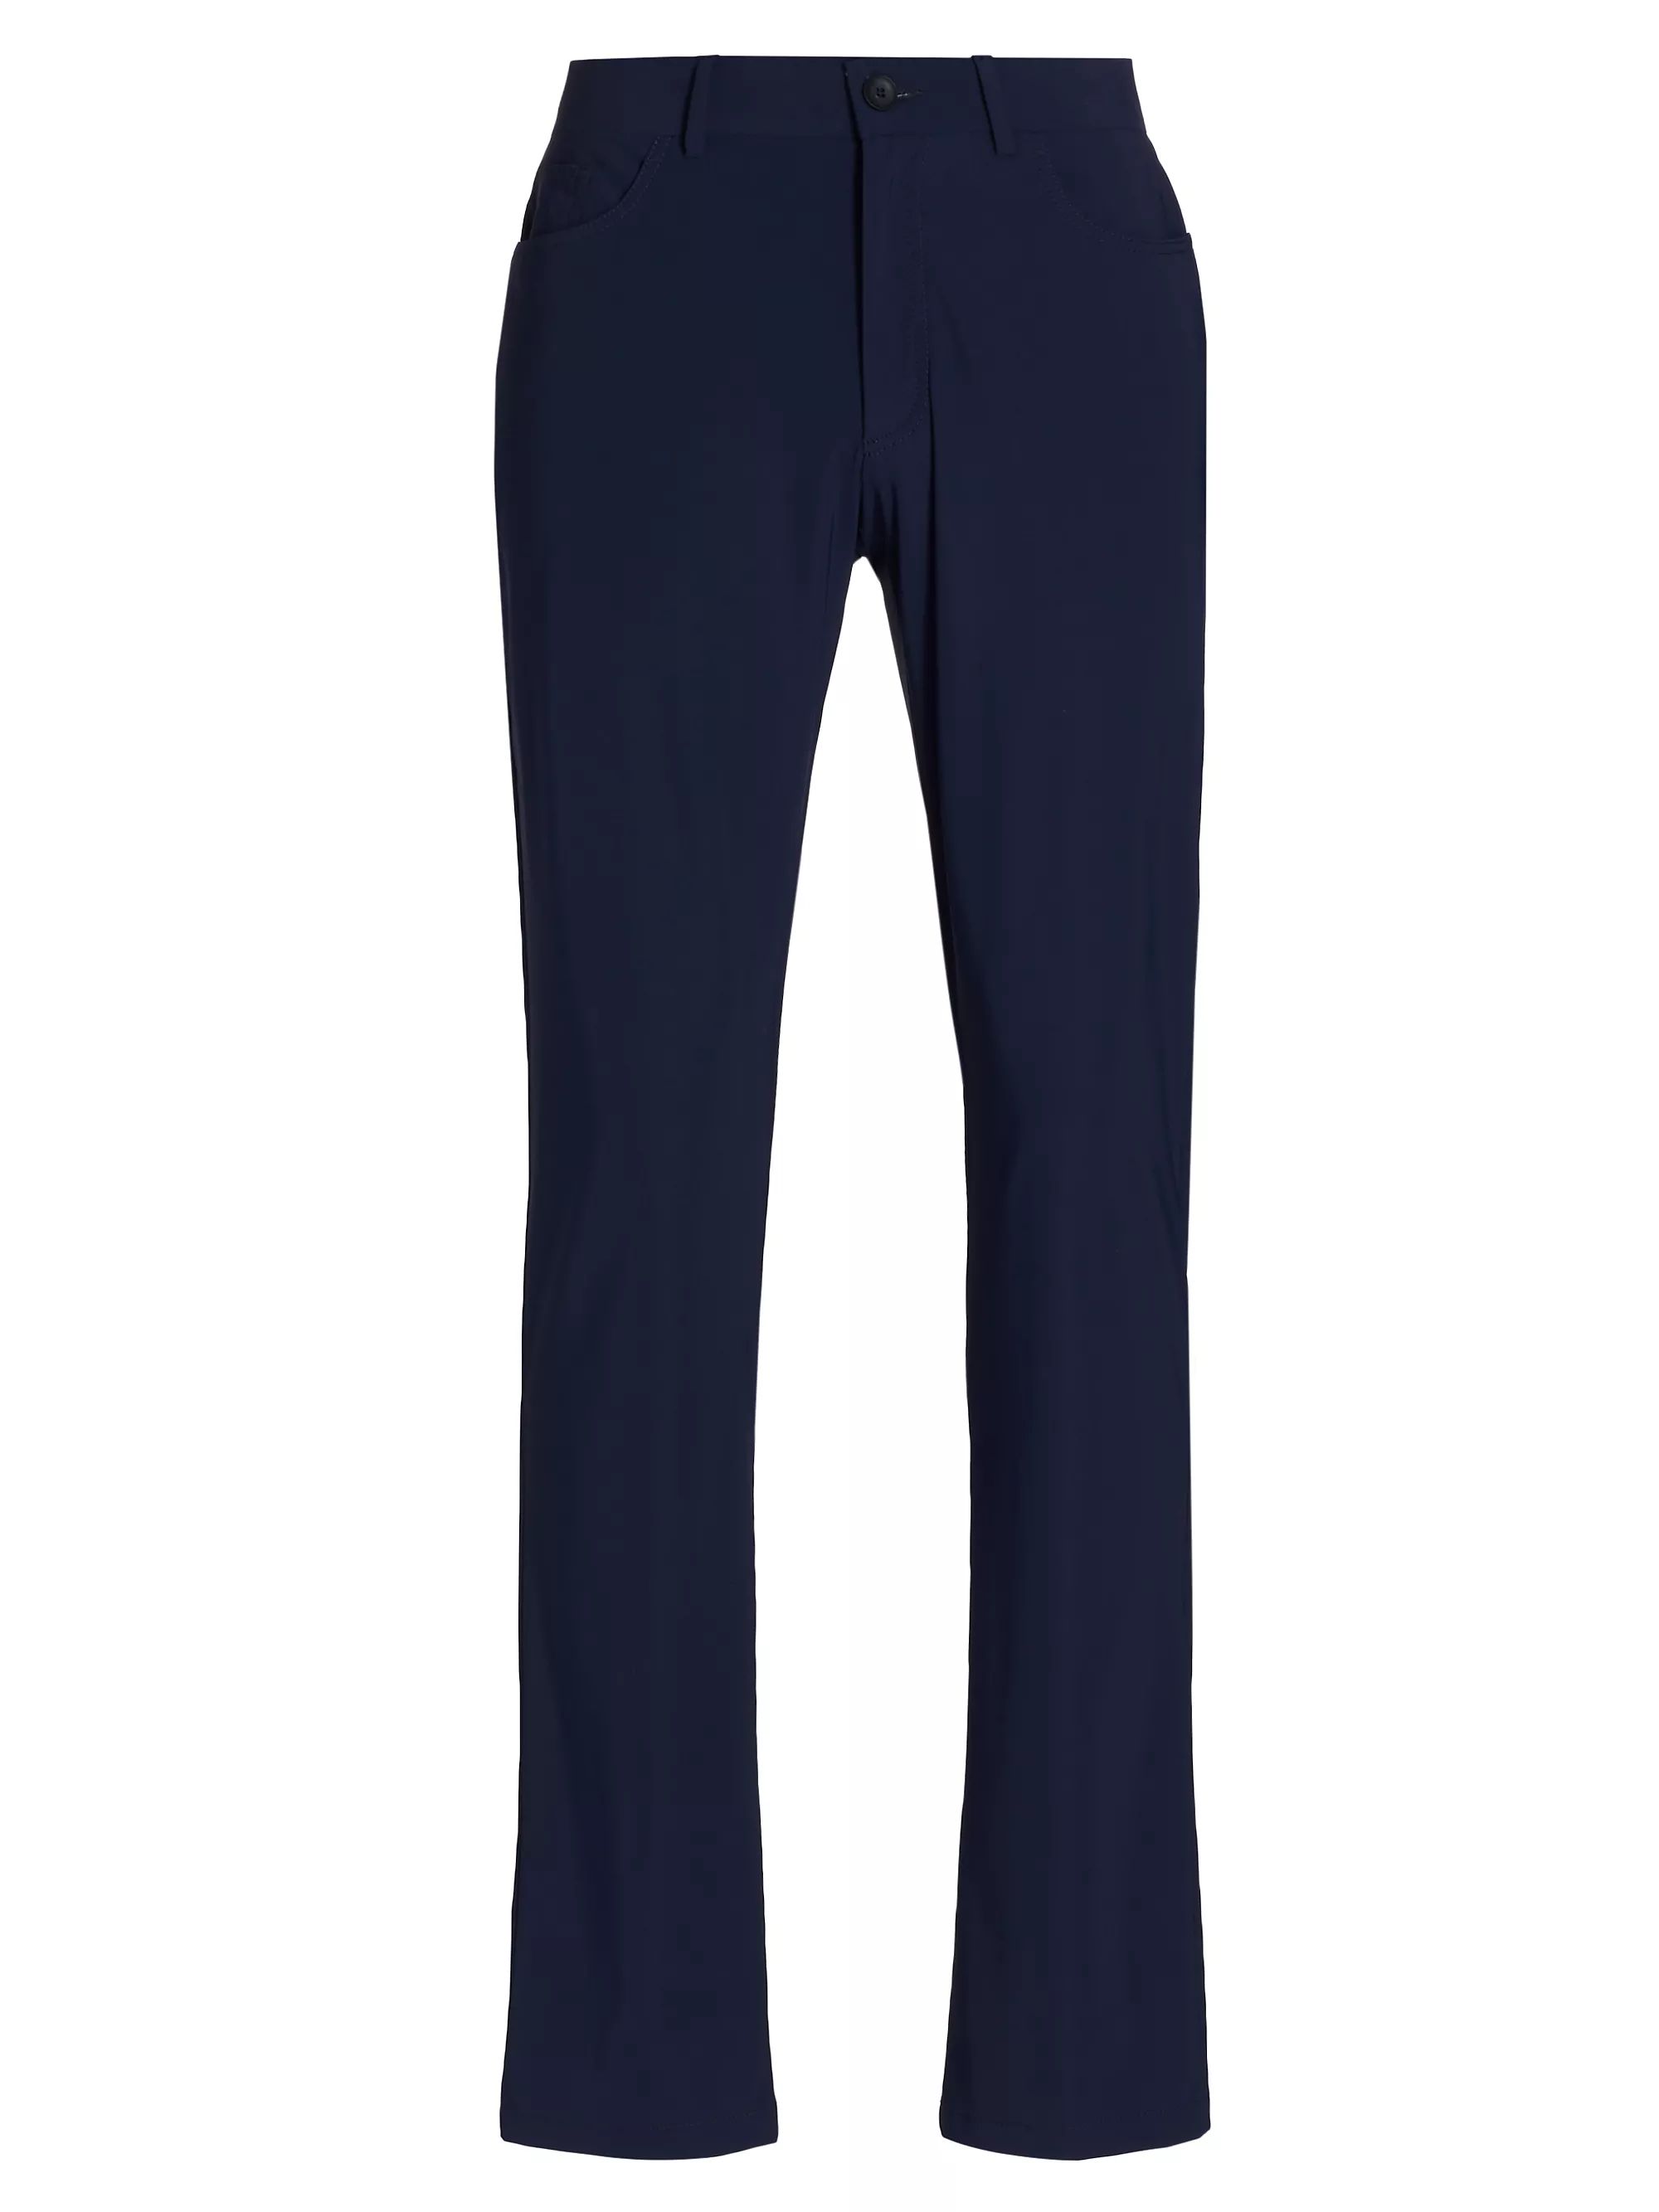 COLLECTION Stretch Traveler Pants | Saks Fifth Avenue